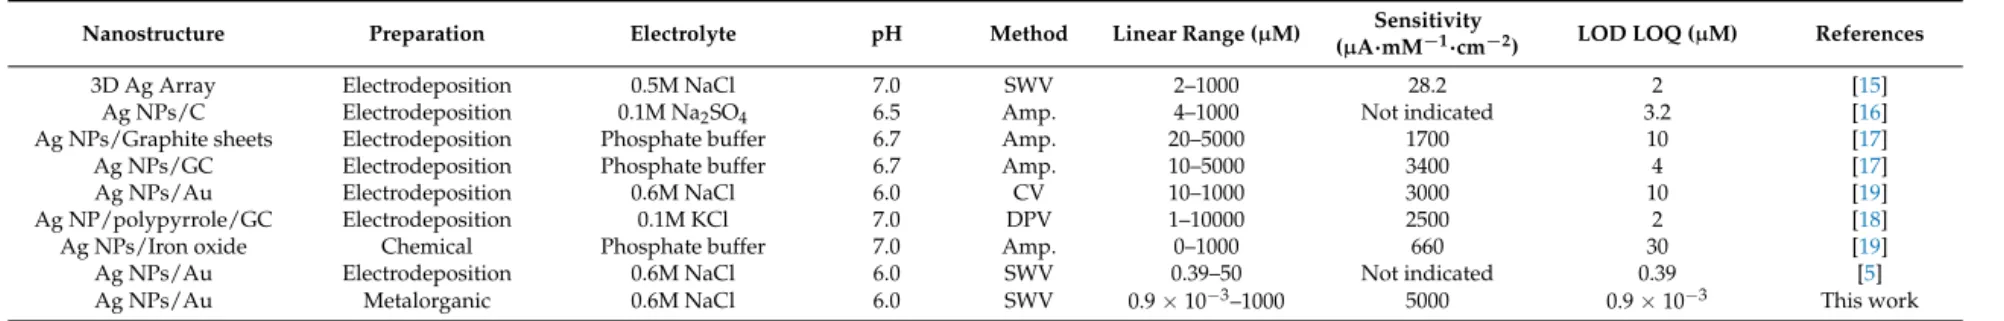 Table 1. Comparison of electrochemical sensors based on silver nanostructure for nitrate determination.